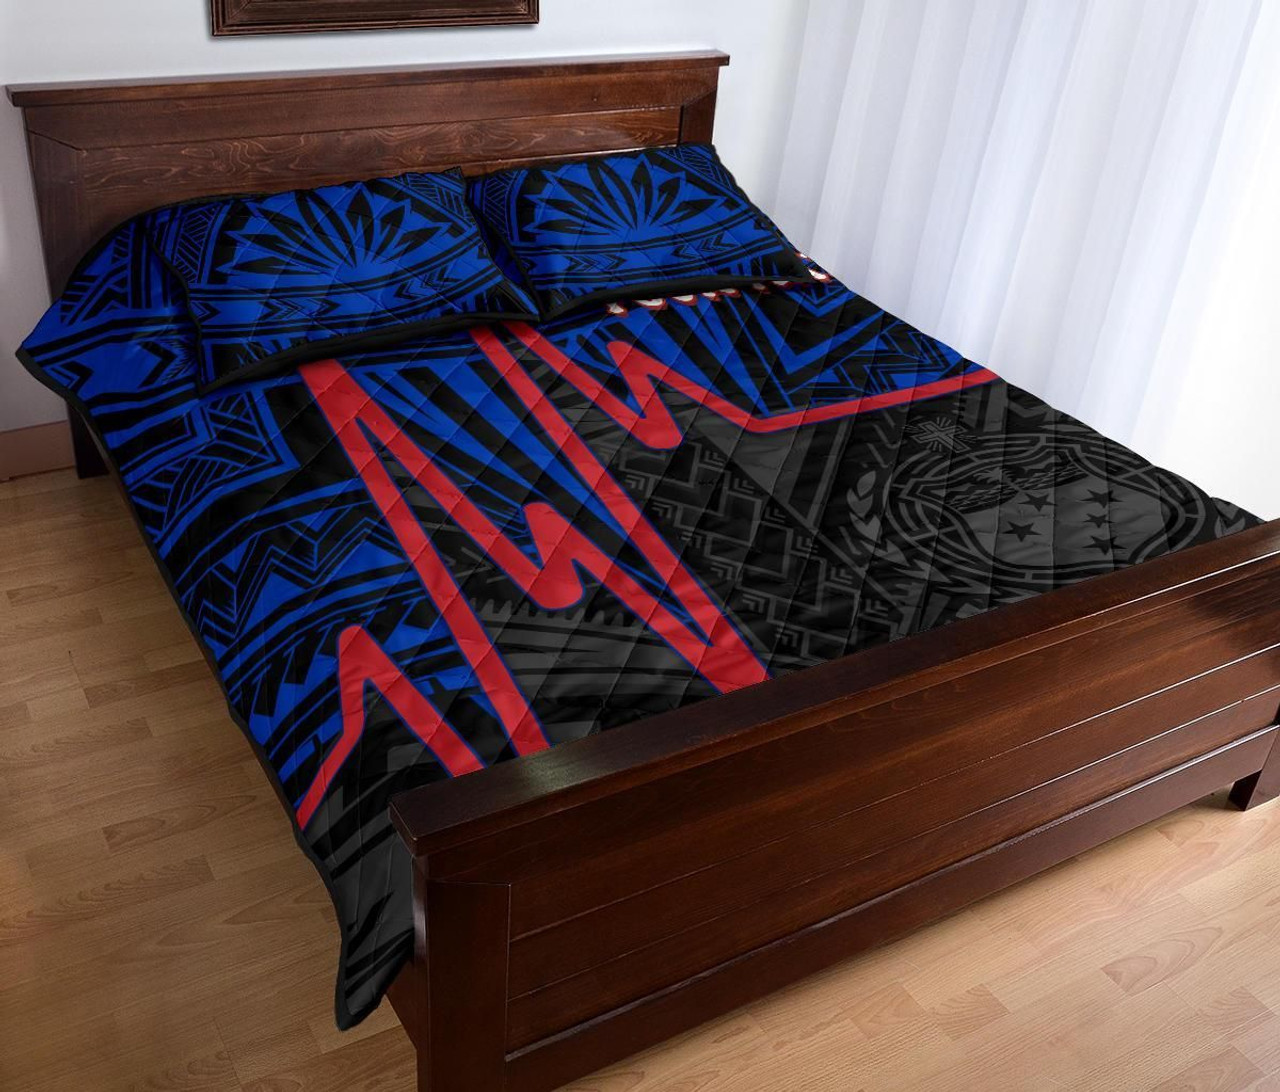 Samoa Personalised Quilt Bed Set - Samoa Seal With Polynesian Patterns In Heartbeat Style(Blue) 3